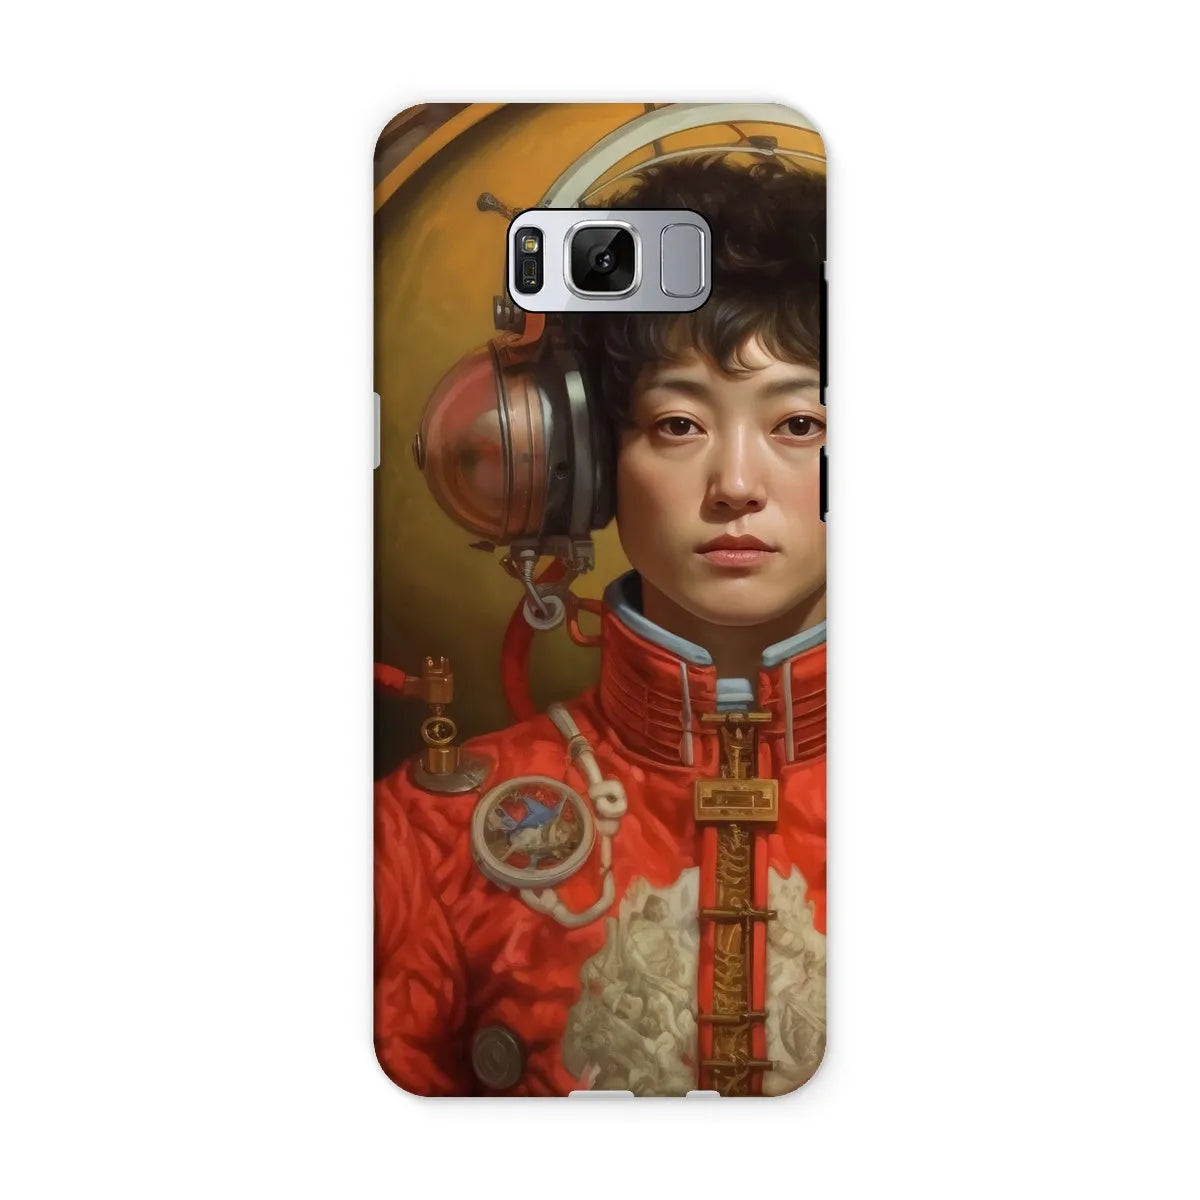 Mùchén - Gay Chinese Astronaut Aesthetic Phone Case - Samsung Galaxy S8 / Matte - Mobile Phone Cases - Aesthetic Art